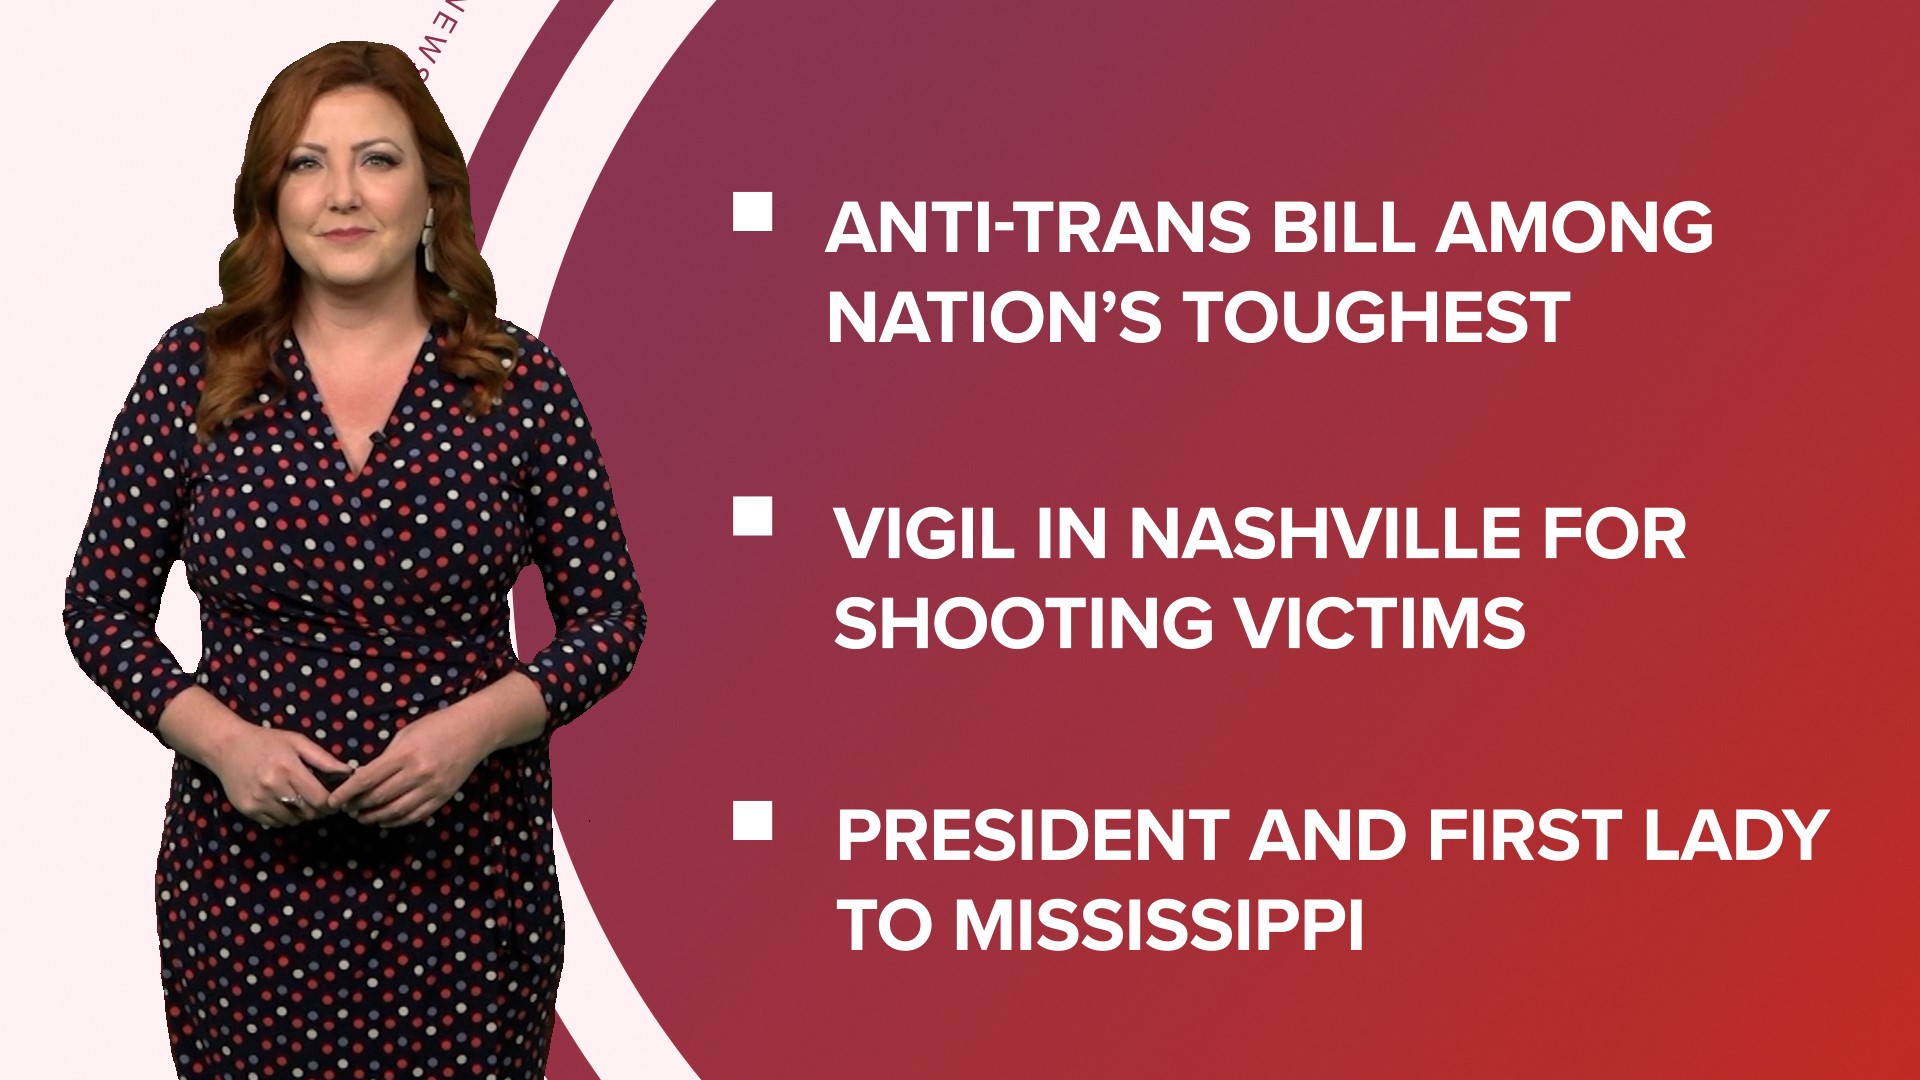 A look at what is happening in the news from an anti-trans bill being passed in Kentucky to the former CEO of Starbucks speaking on union busting on Capitol Hill.